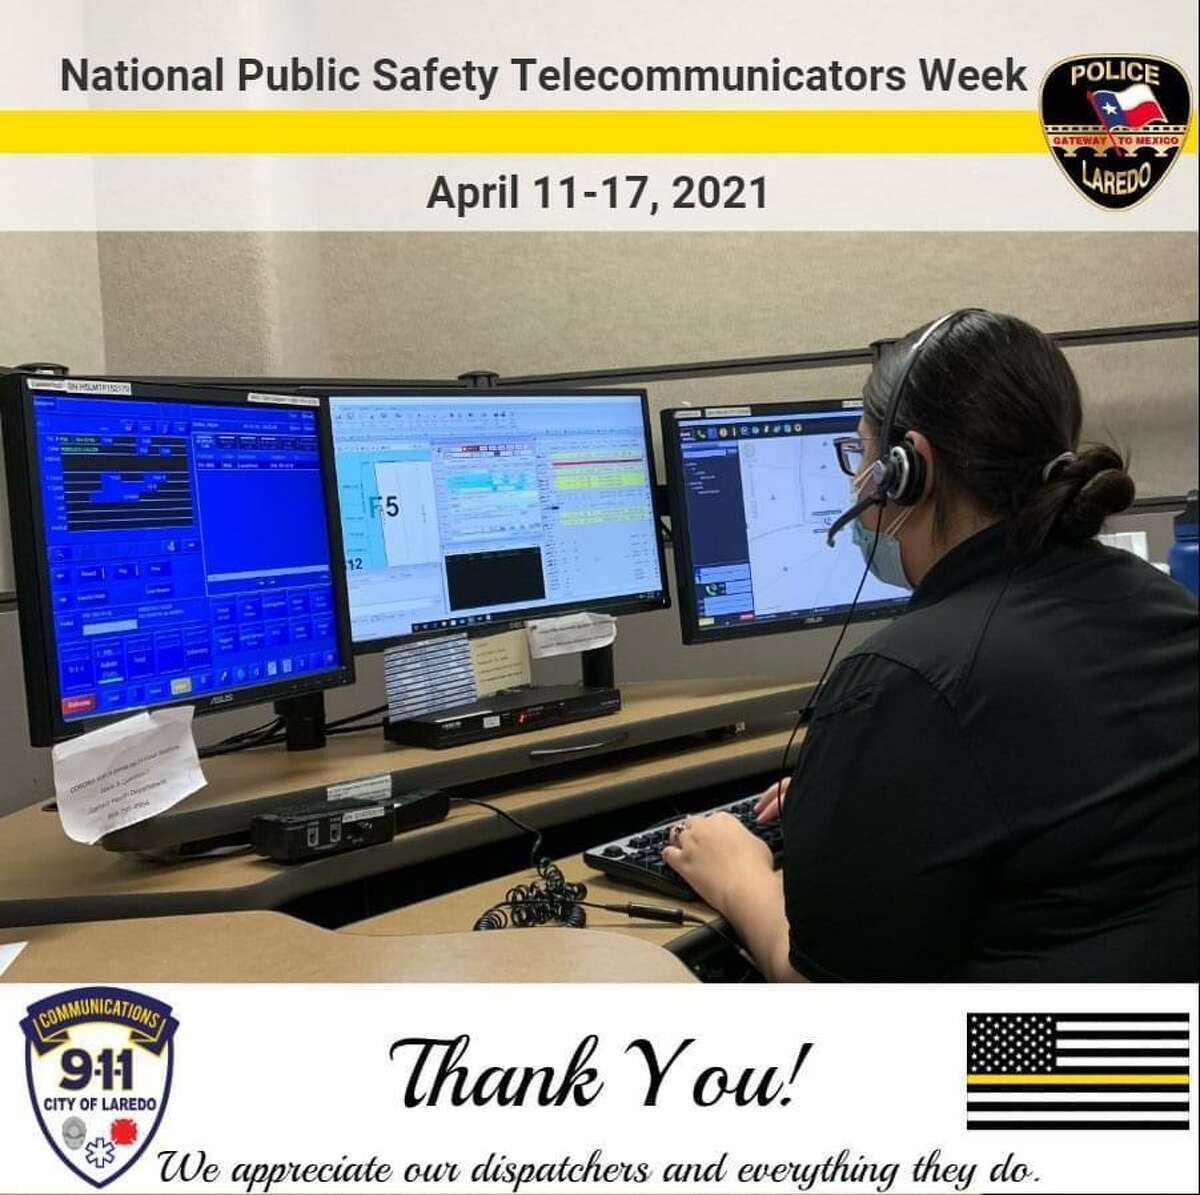 Laredo police expressed gratitude for their dispatchers as part of National Telecommunicators Week.